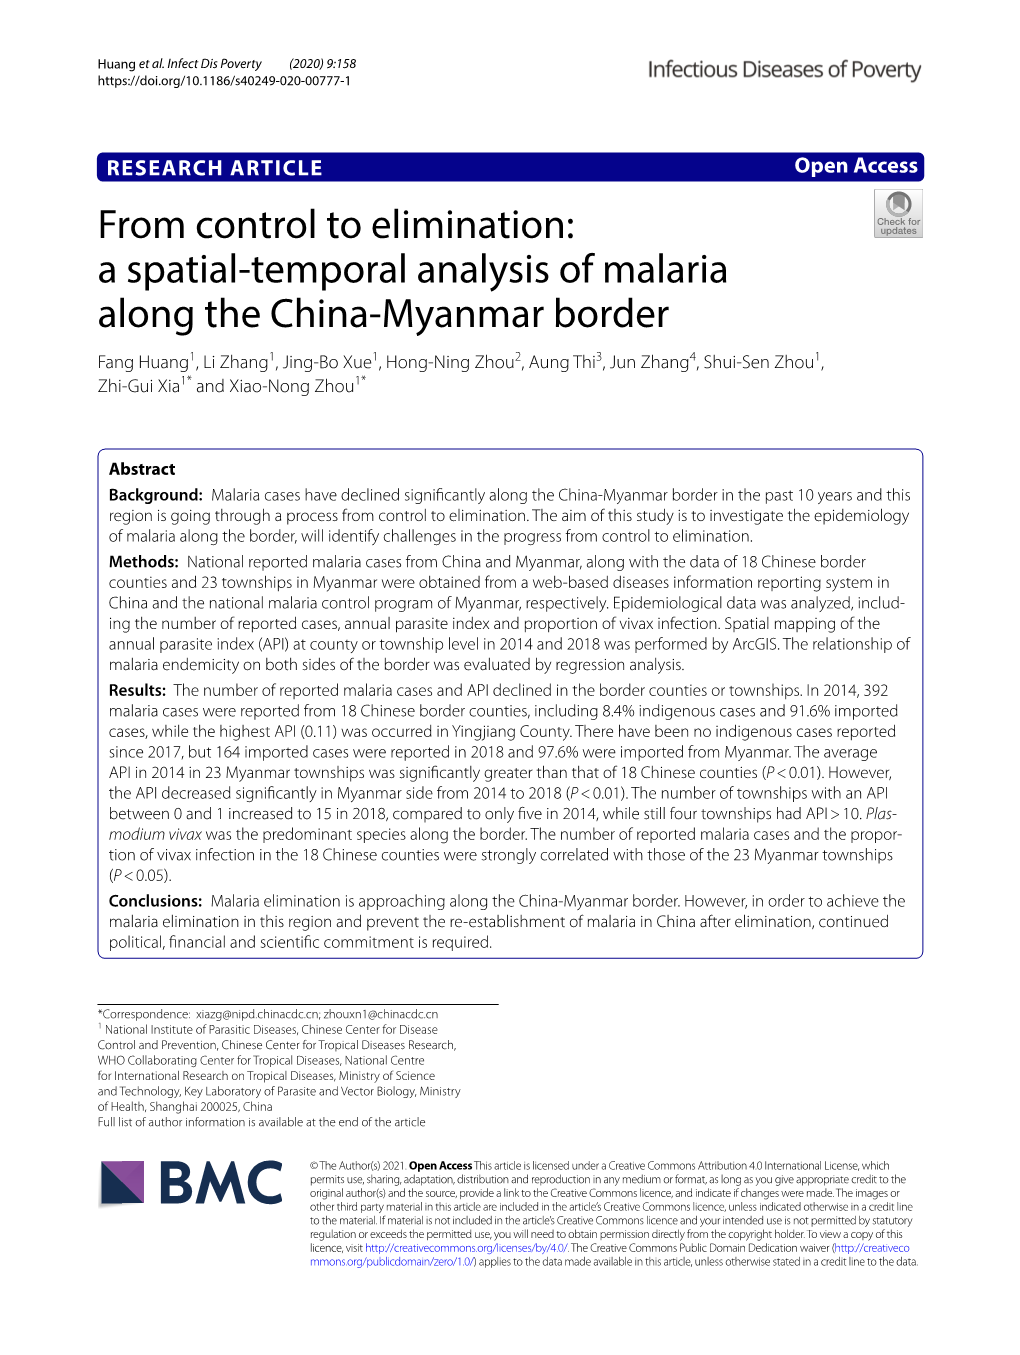 From Control to Elimination: a Spatial–Temporal Analysis of Malaria Along the China–Myanmar Border